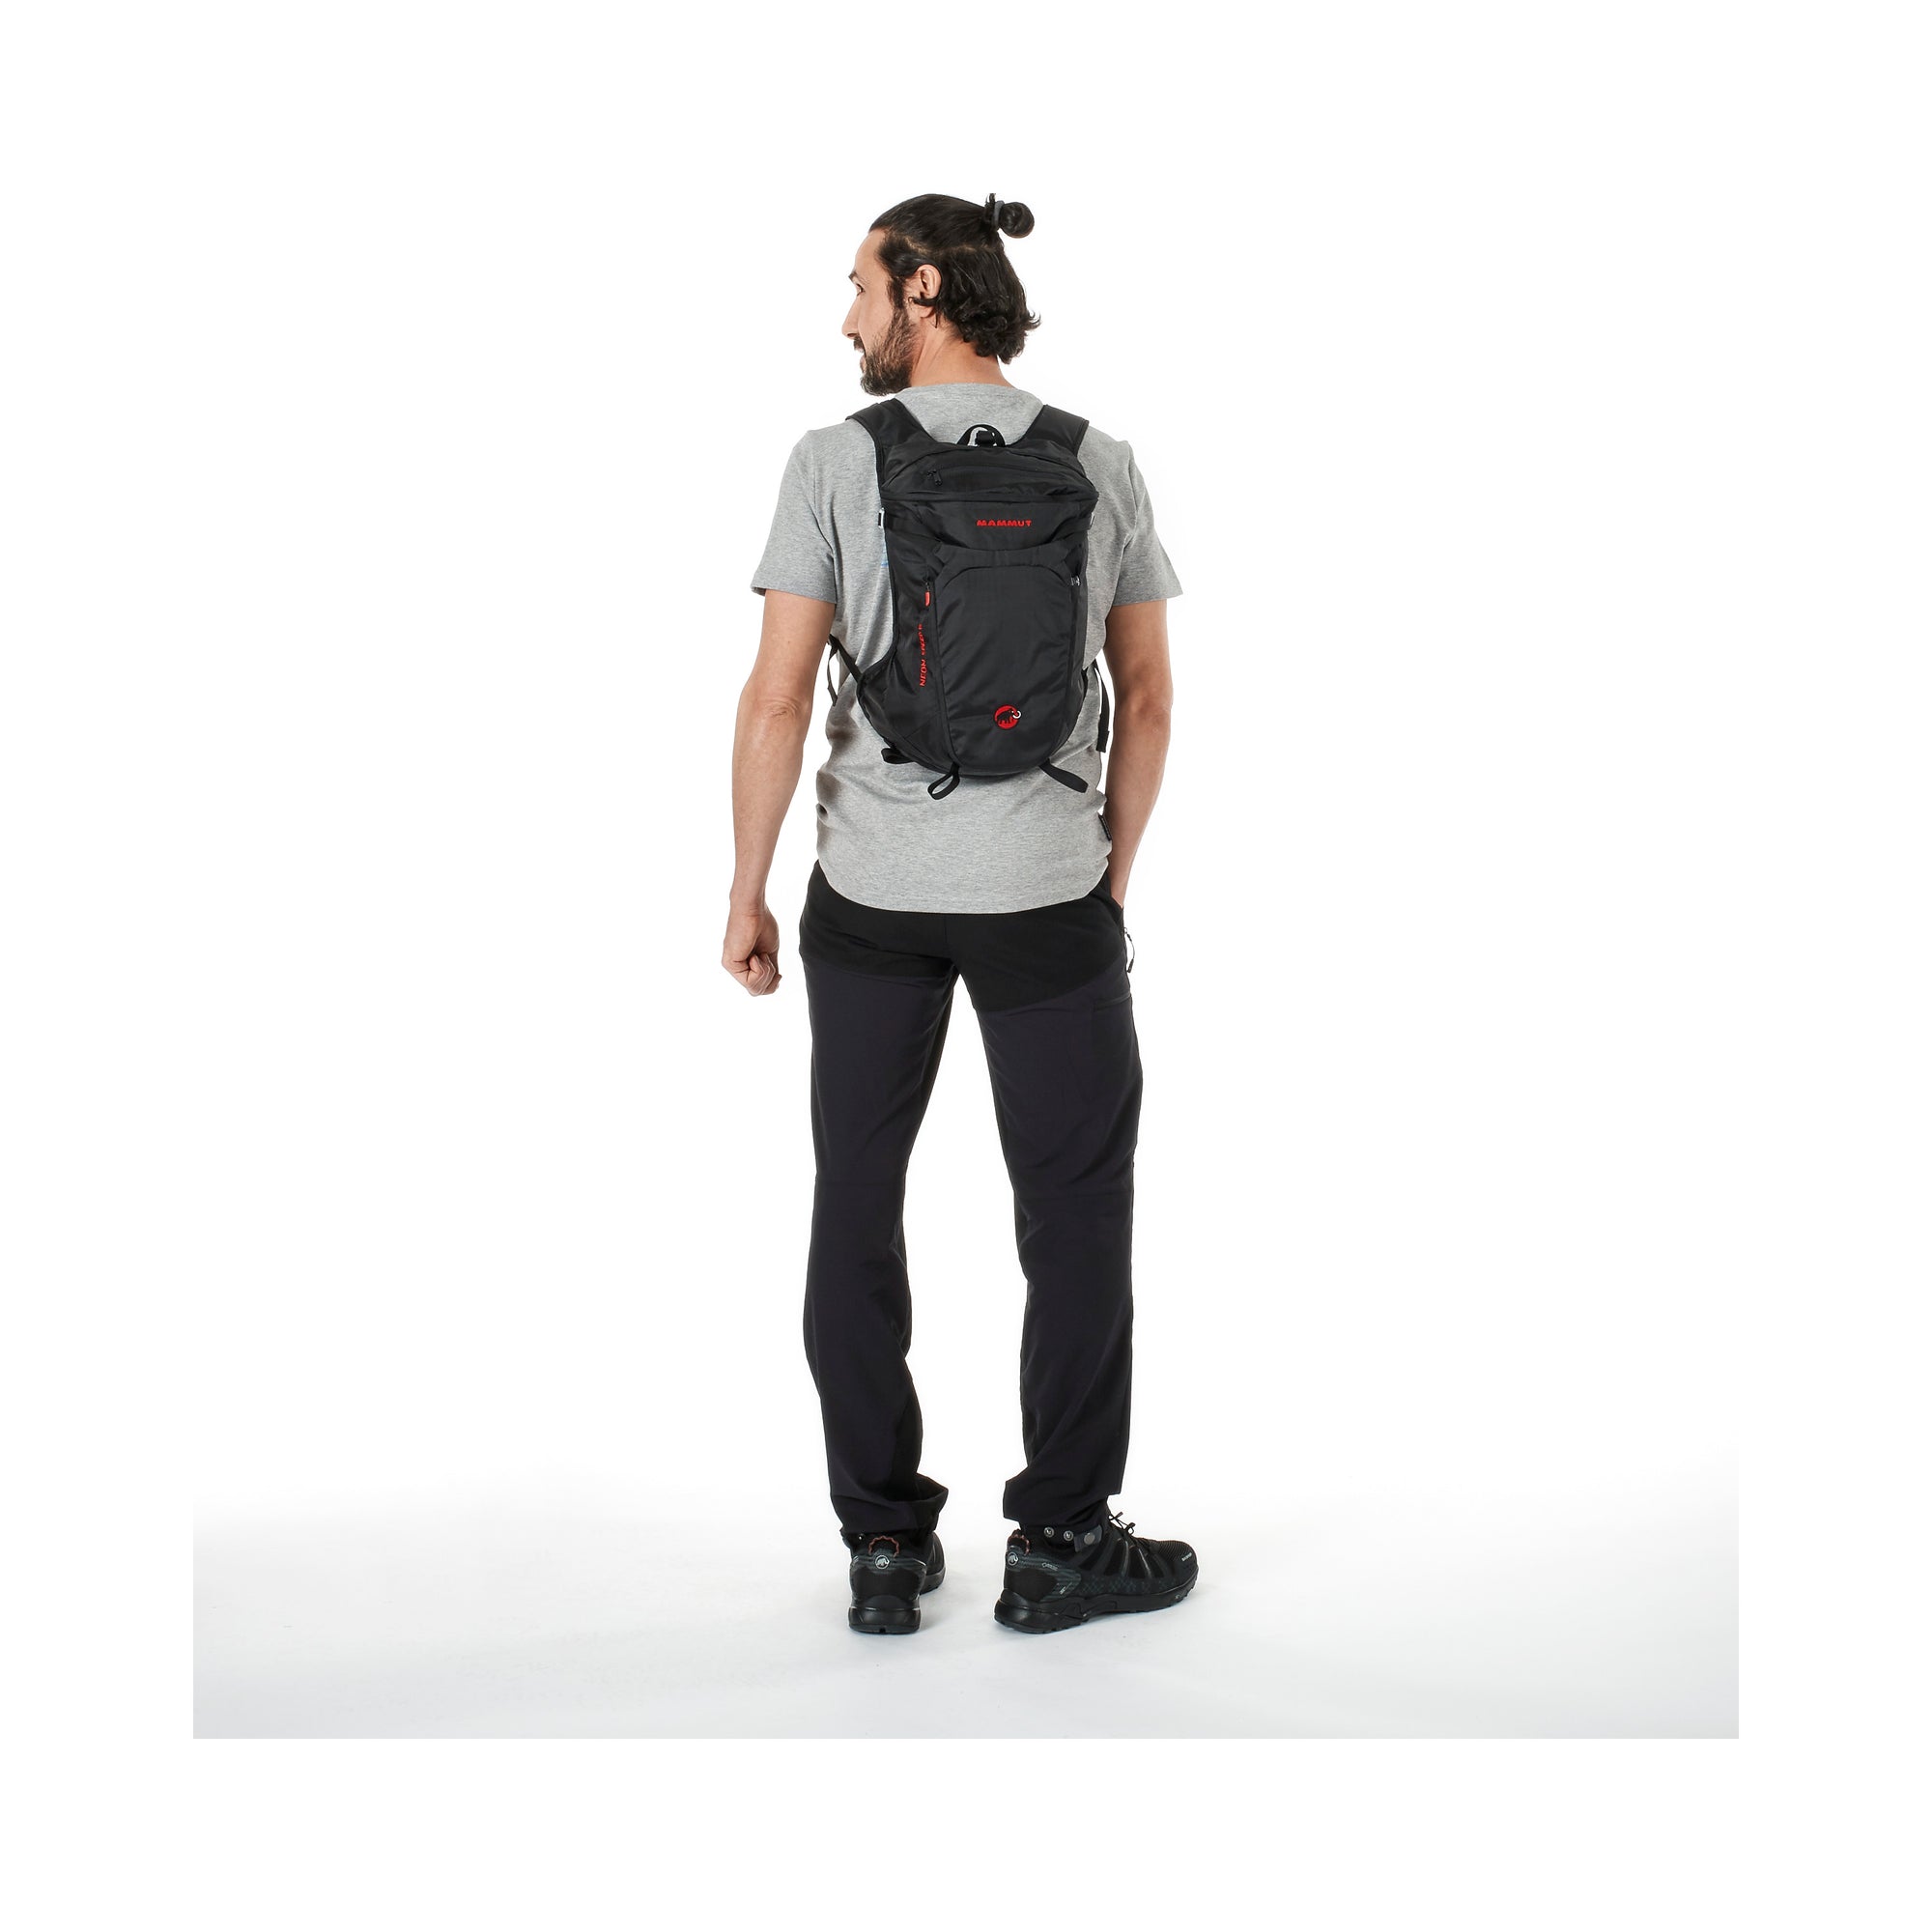 a model shows the back of the packc